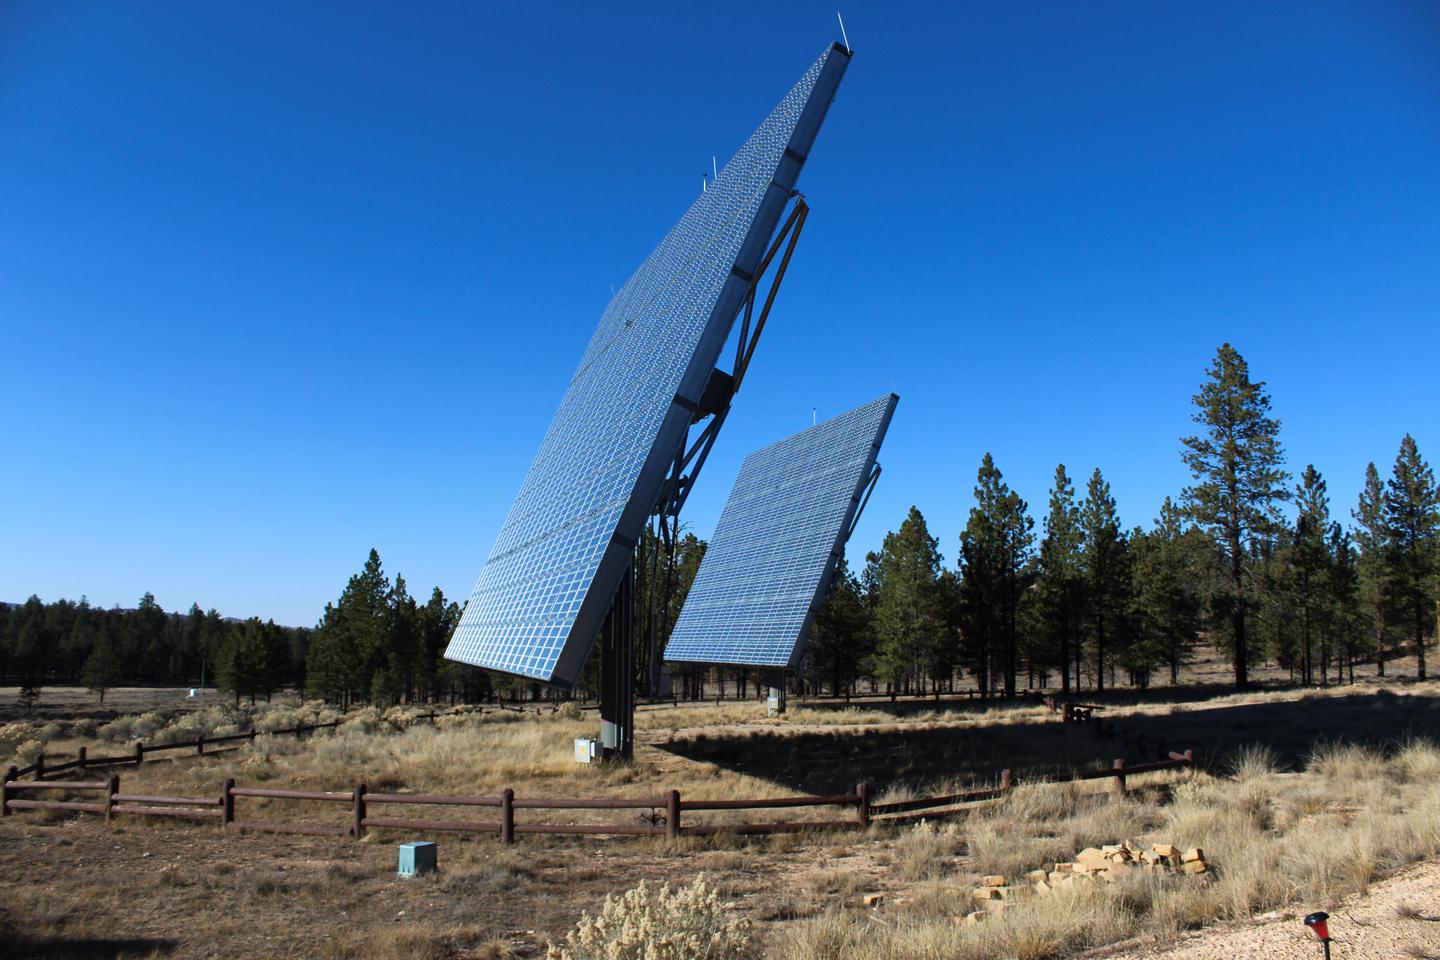 Visitor Center Solar Photovoltaic ArraysThe park's Concentrating Solar Photovoltaic (CPV) array generates around 400,000 kilowatt hours a year. The two 70' x 50' tracking generators are located along the Shared Use Path near the Visitor Center.